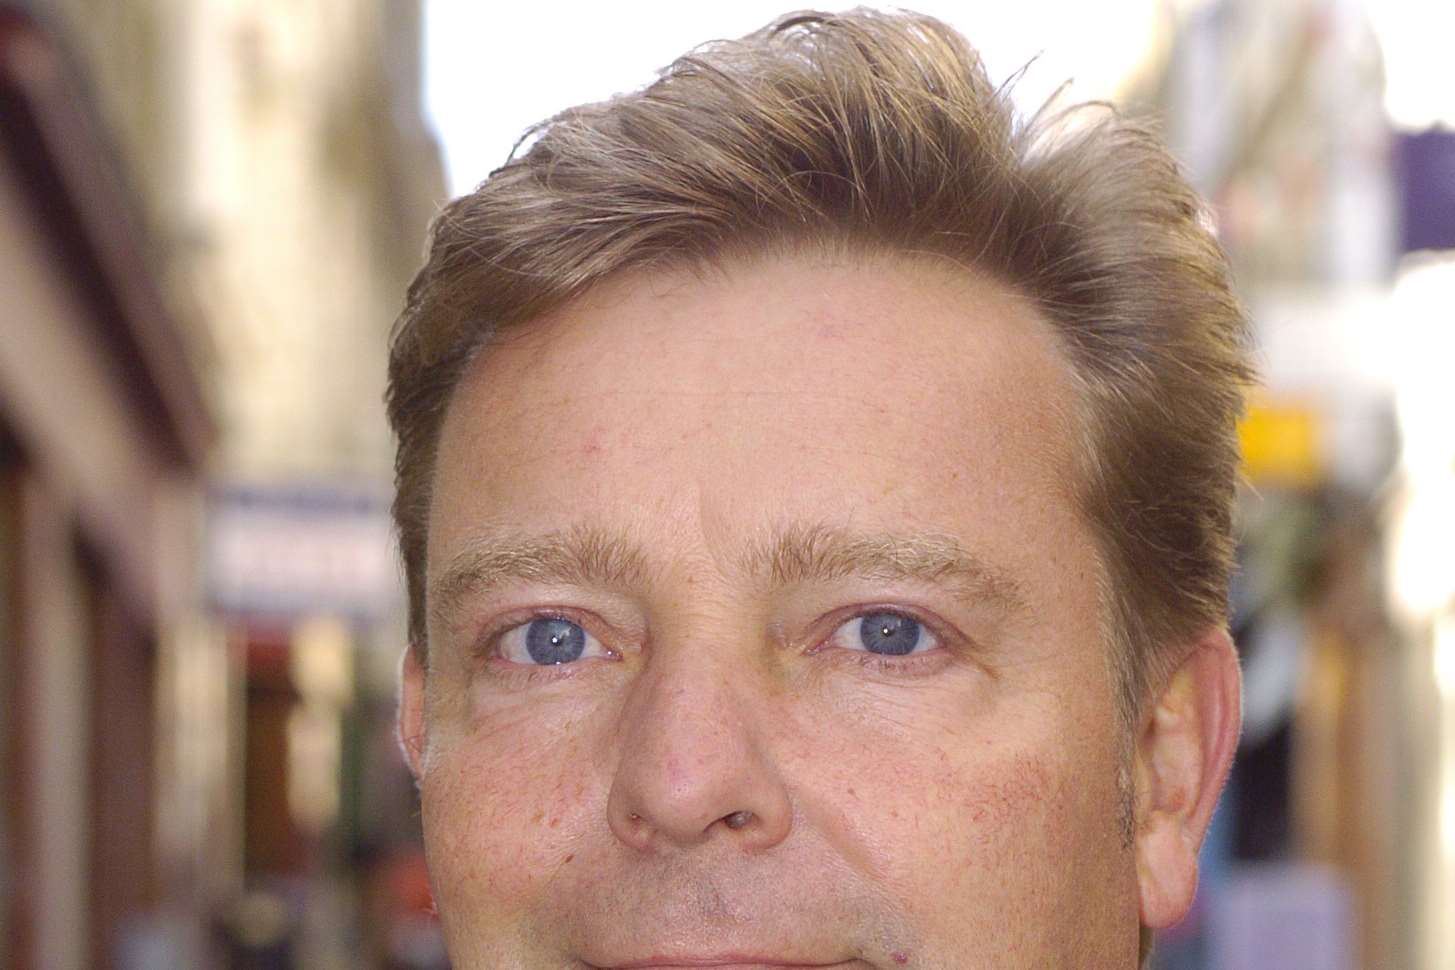 South Thanet MP Craig Mackinlay is "delighted" with EU referendum result